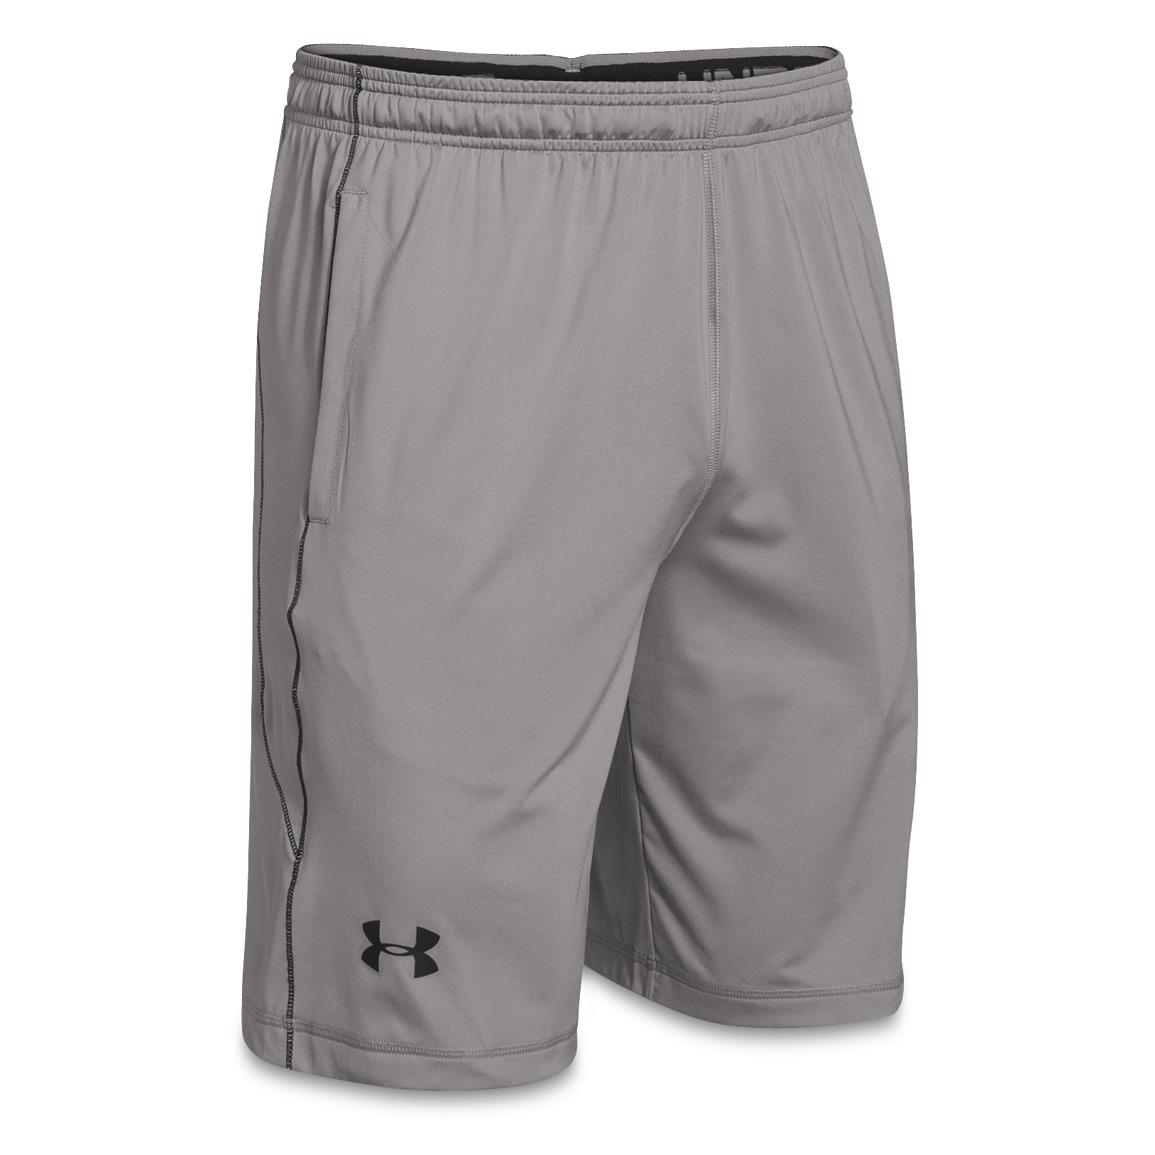 Under Armour Men's Raid Athletic Shorts - 635815, Shorts at Sportsman's Guide